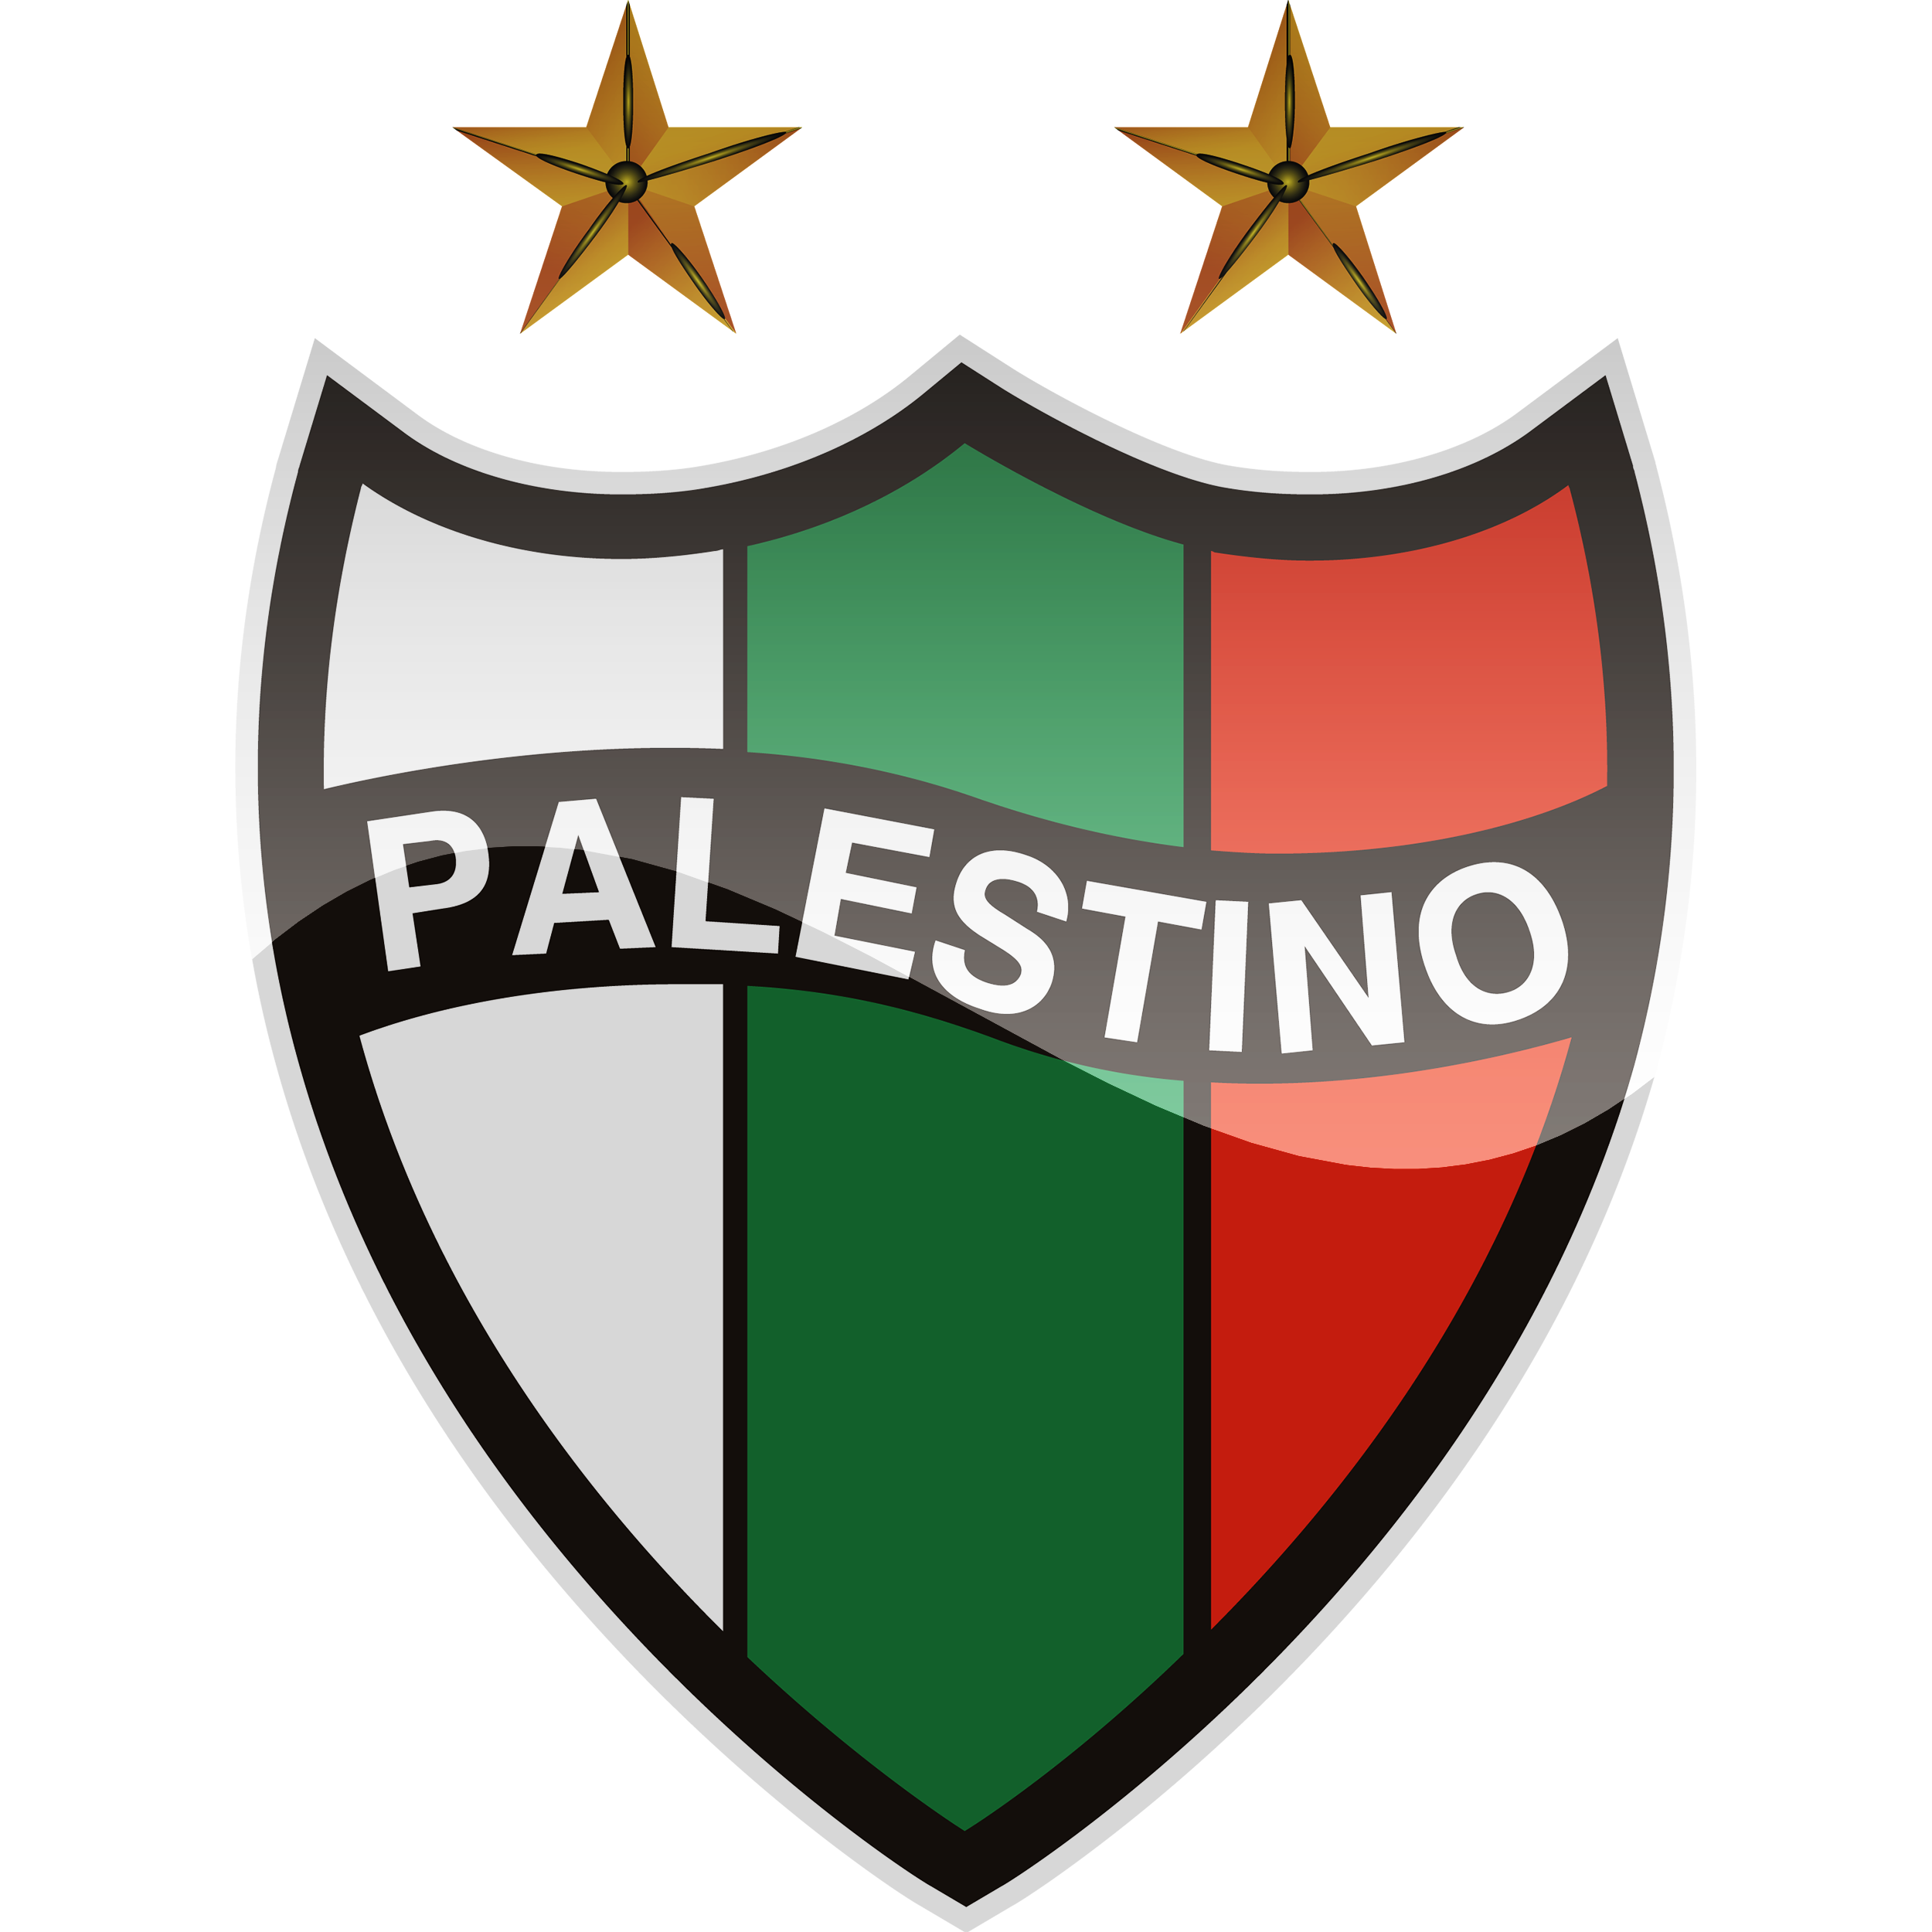 Palestino vs Flamengo Prediction: This game is decisive for both teams